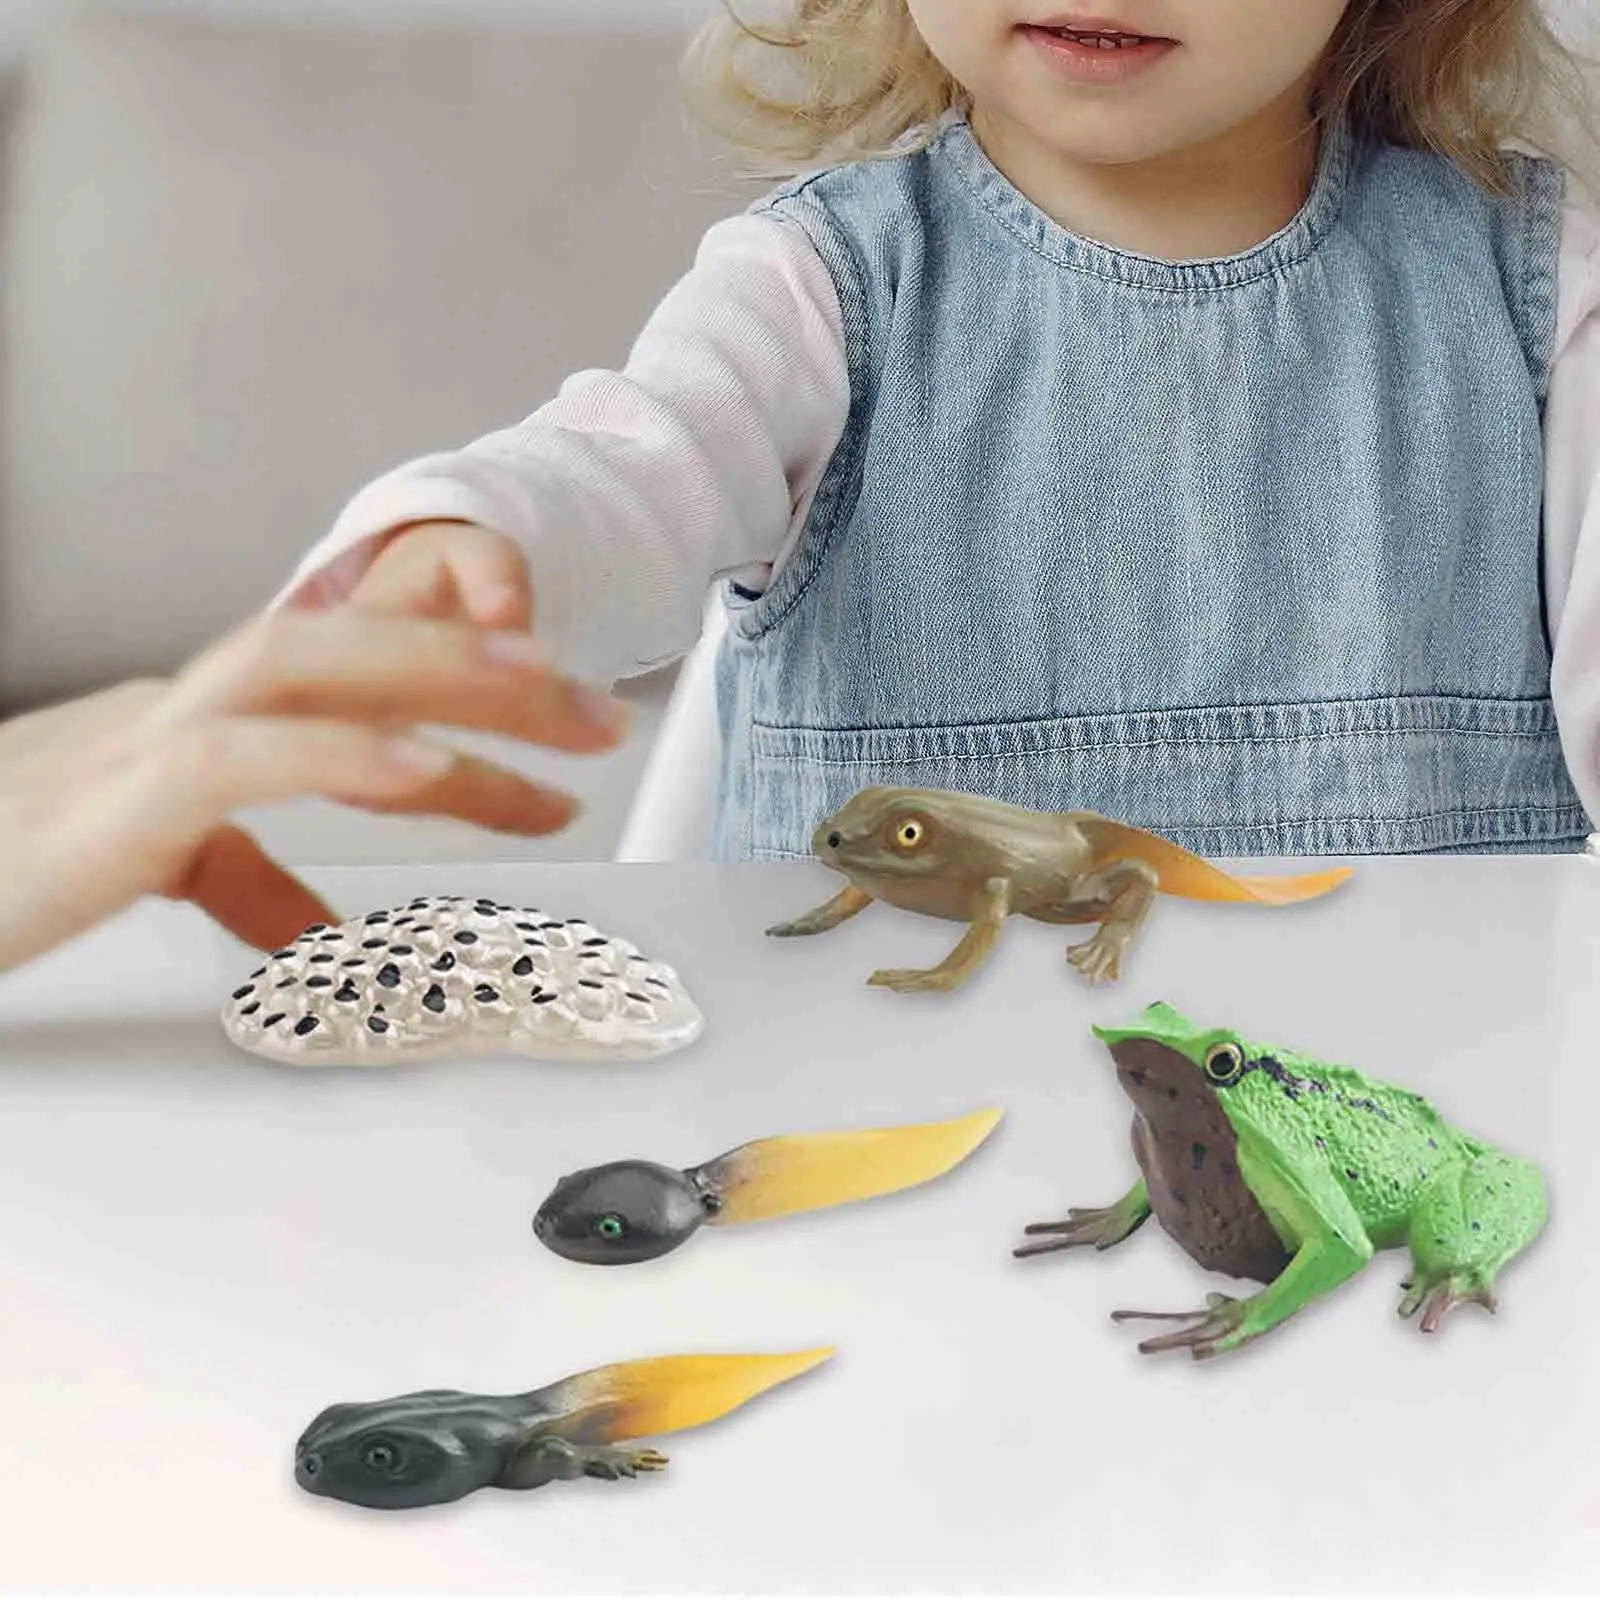 Life Cycle of Frog Toys Cognitive Teaching Materials Realistic for Age 3 to 6 Egg Tadpole to Frog Animal Growth Cycle Set